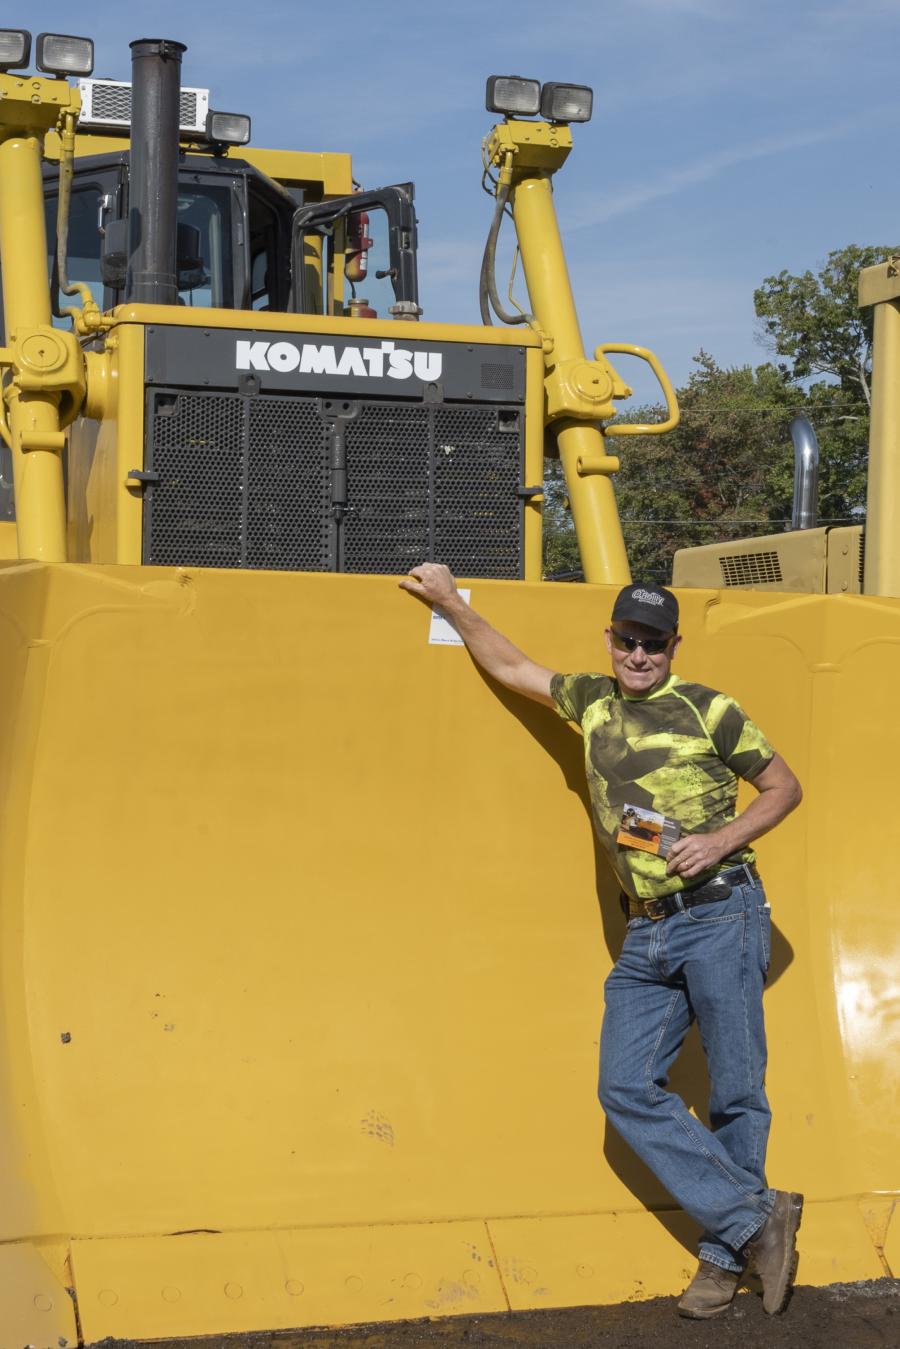 Kirk Chellstorp of Full Spectrum Industrial Coating in Stafford Spring, Conn., stands in front of a 2007 Komatsu WA450-1 wheel loader.